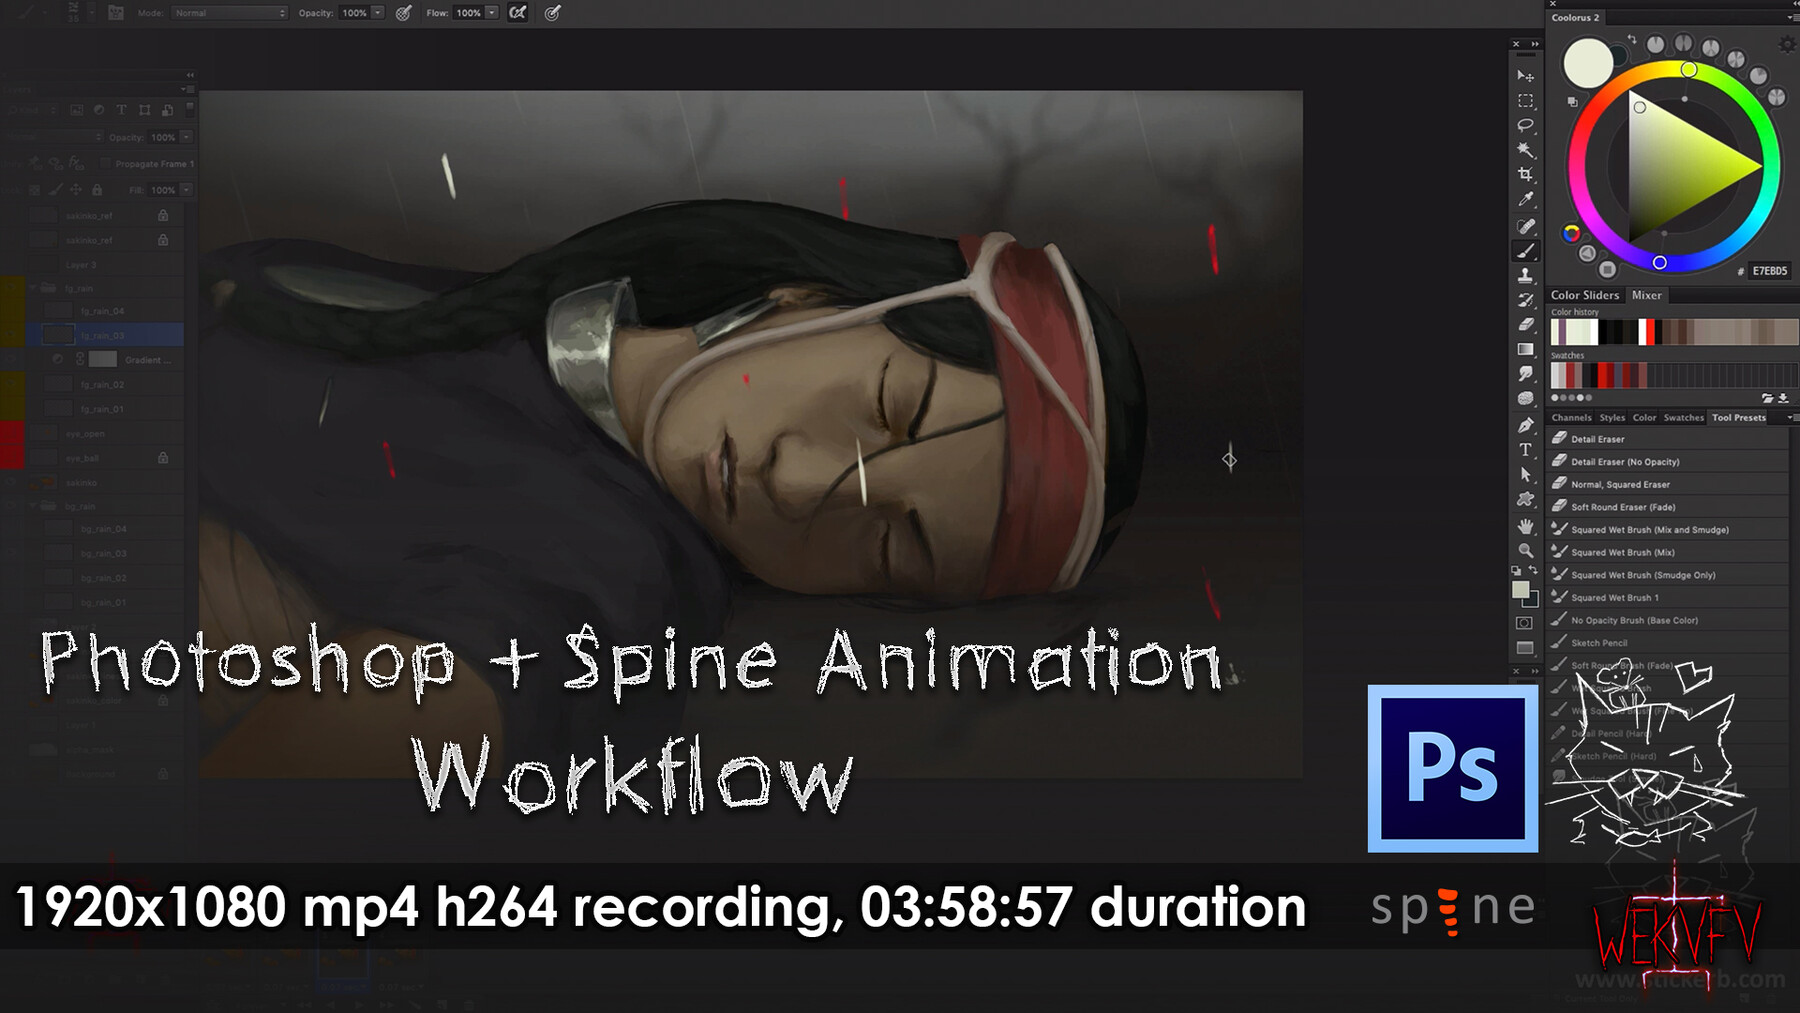 ArtStation - Photoshop and Spine Combined Animation Workflow | Tutorials